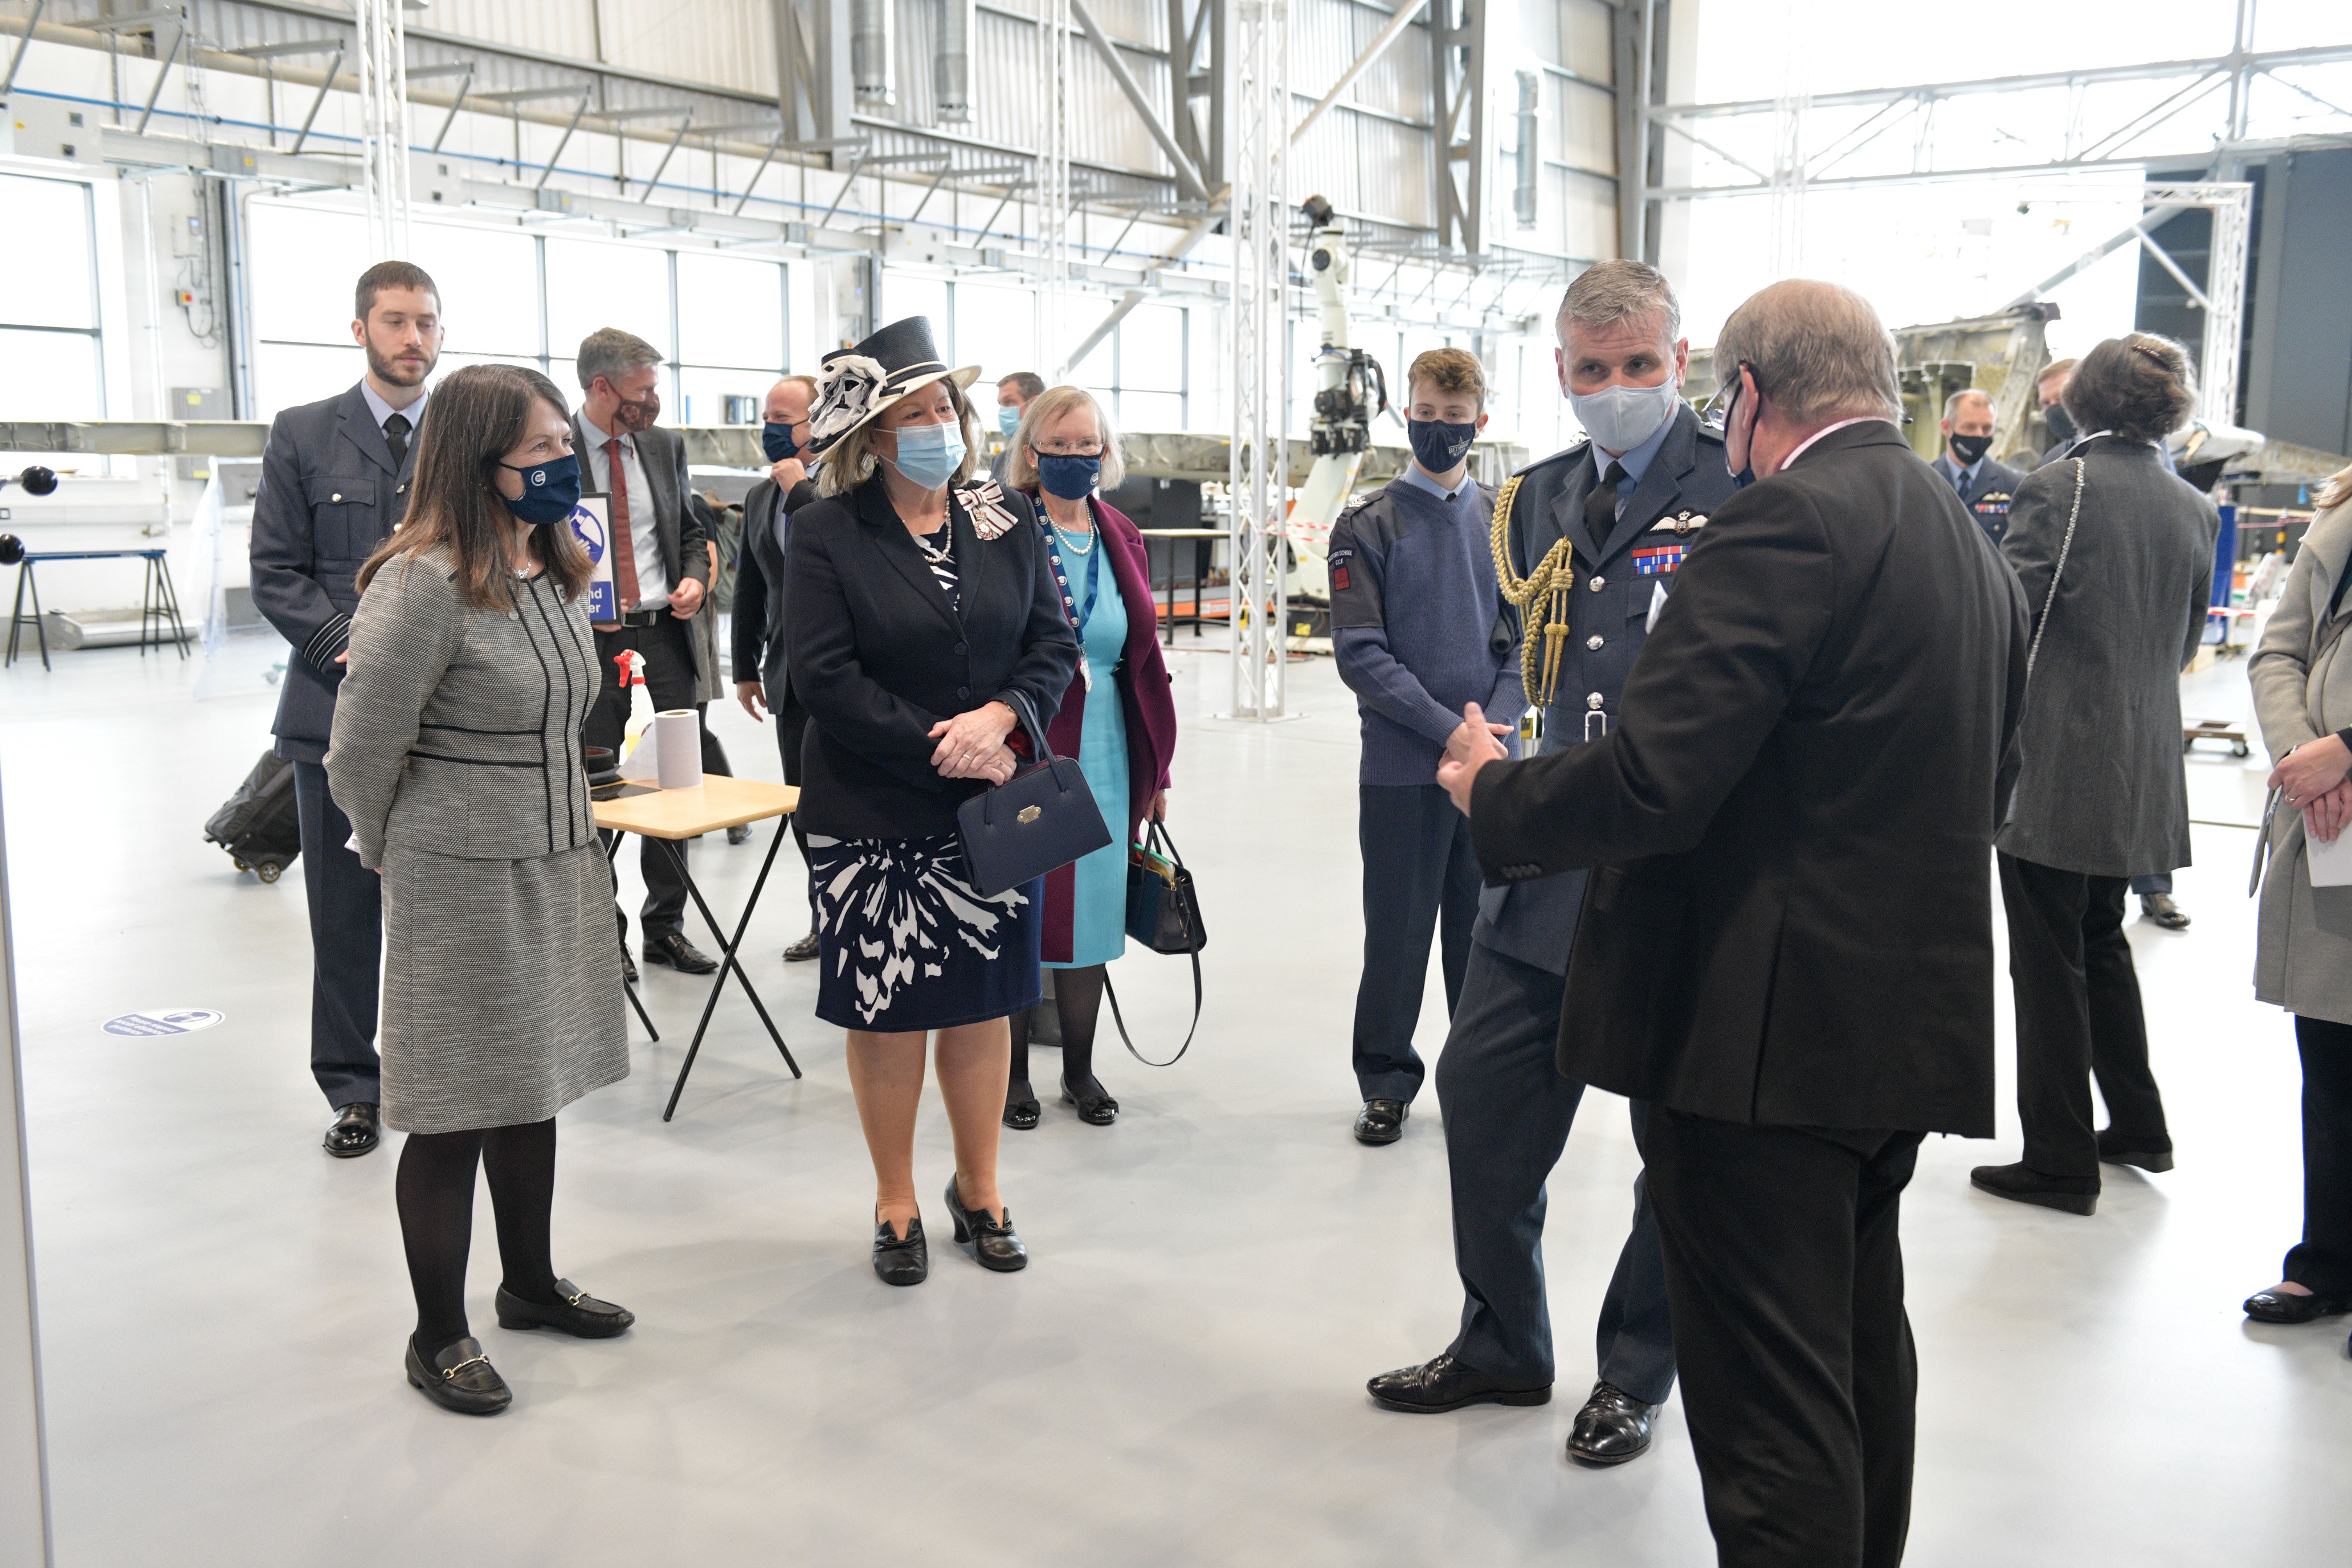 Personnel and significant individuals stand inside a hangar.